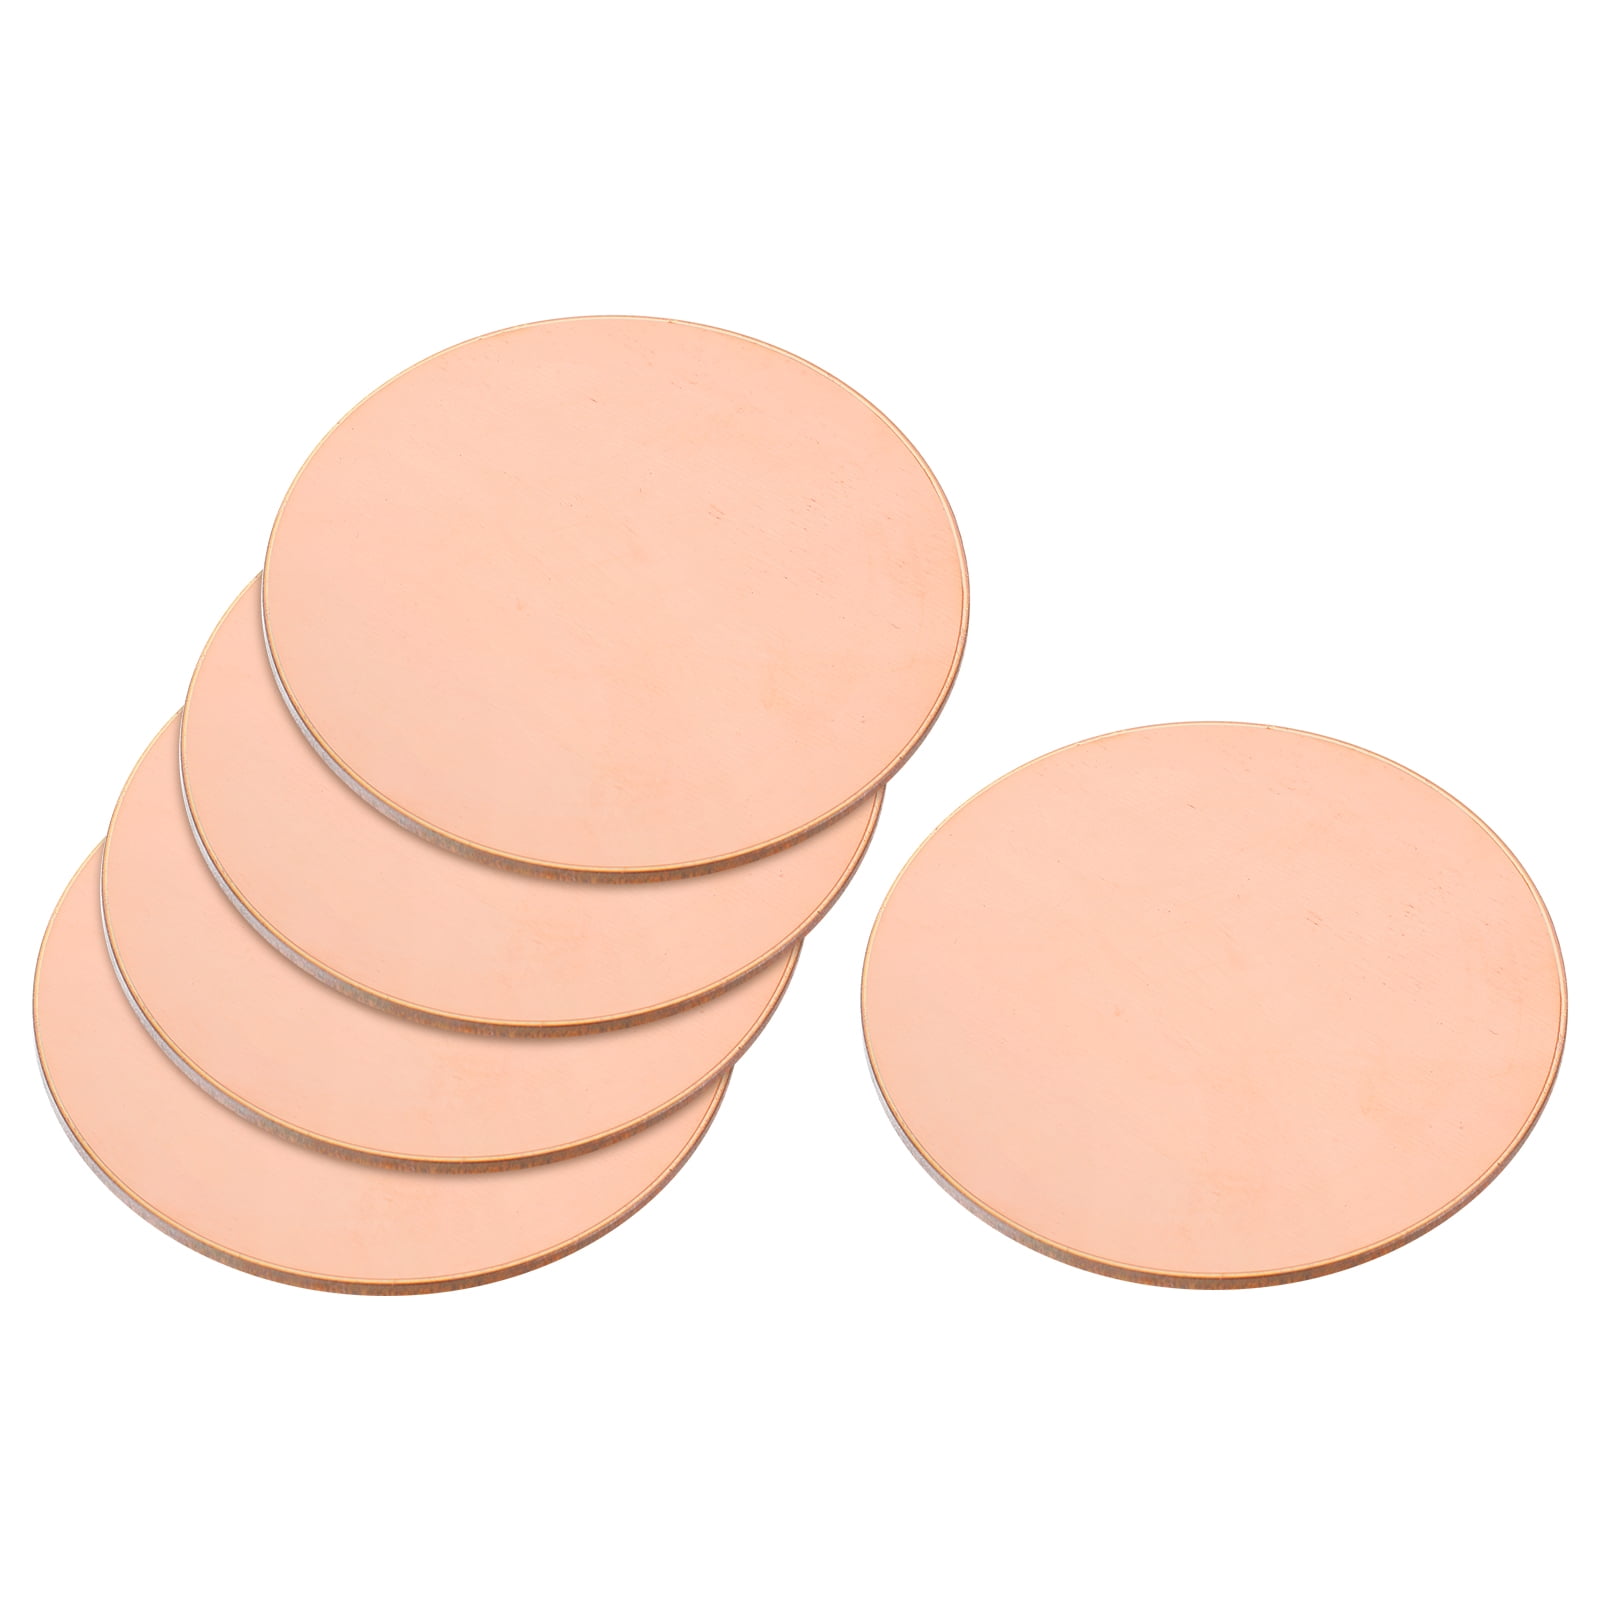 Pure Copper Sheet, 5/8 x 0.04 18 Gauge T2 Copper Metal Round Plate for  Crafts, Electrical Repairs, 5 Pack 